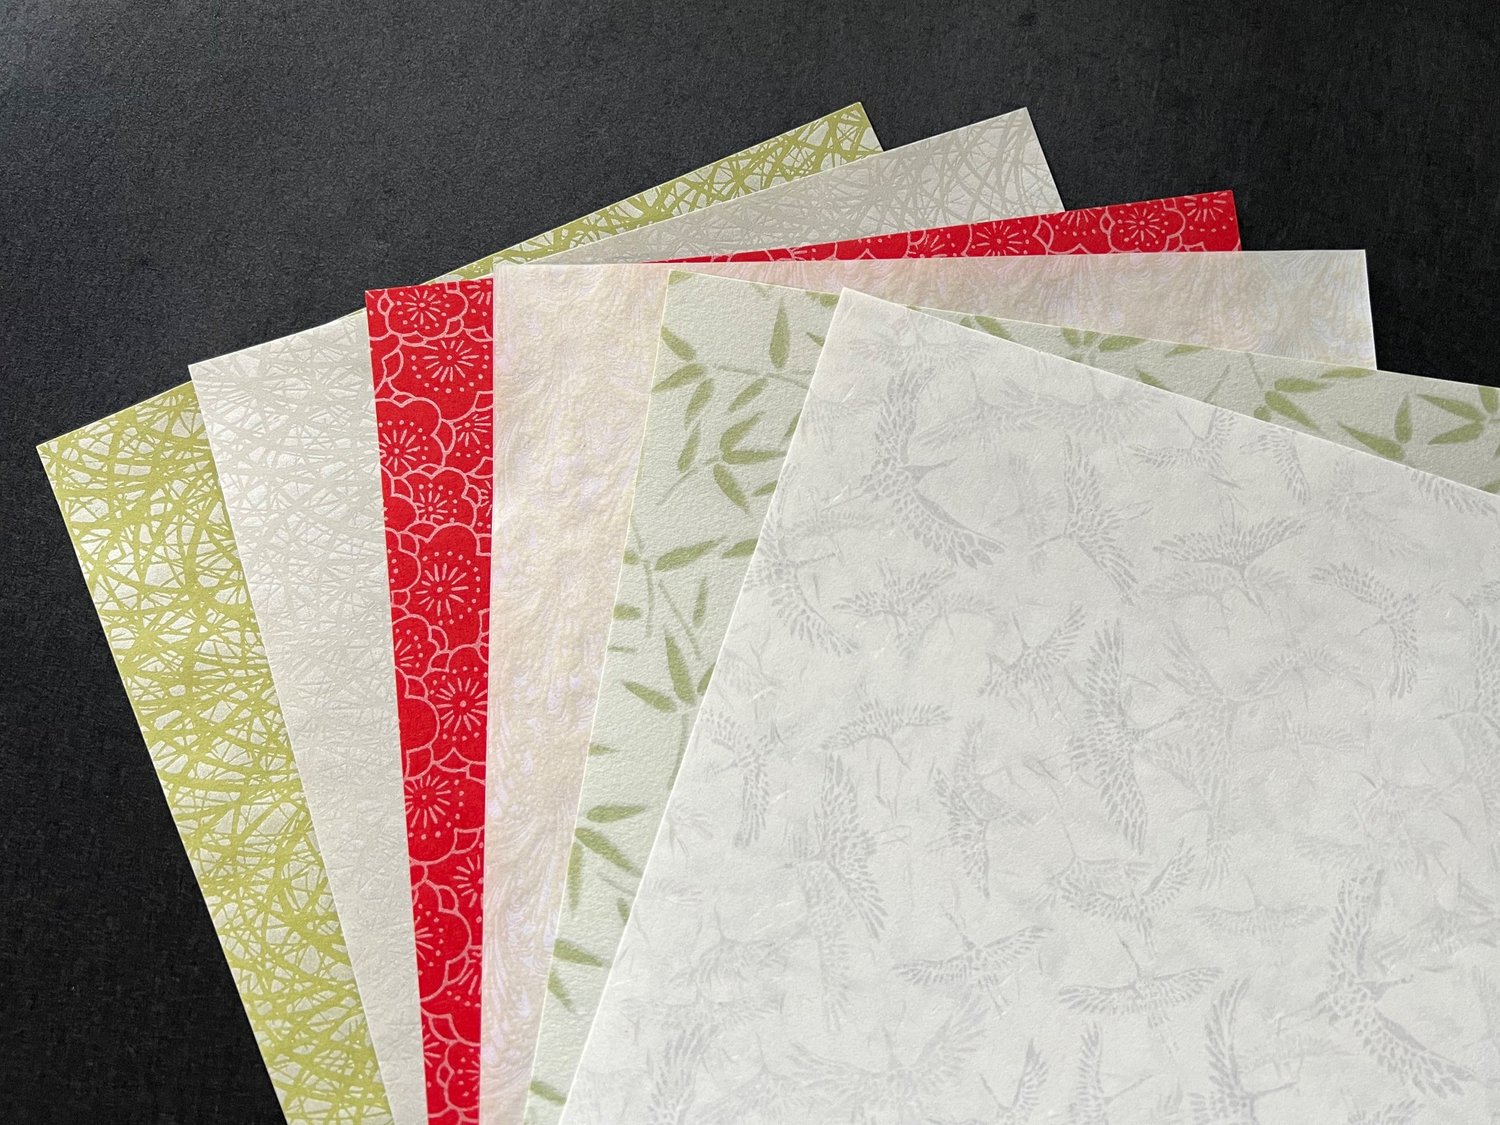 Traditional Patterned 3 Japanese Origami Paper / 144 Sheets